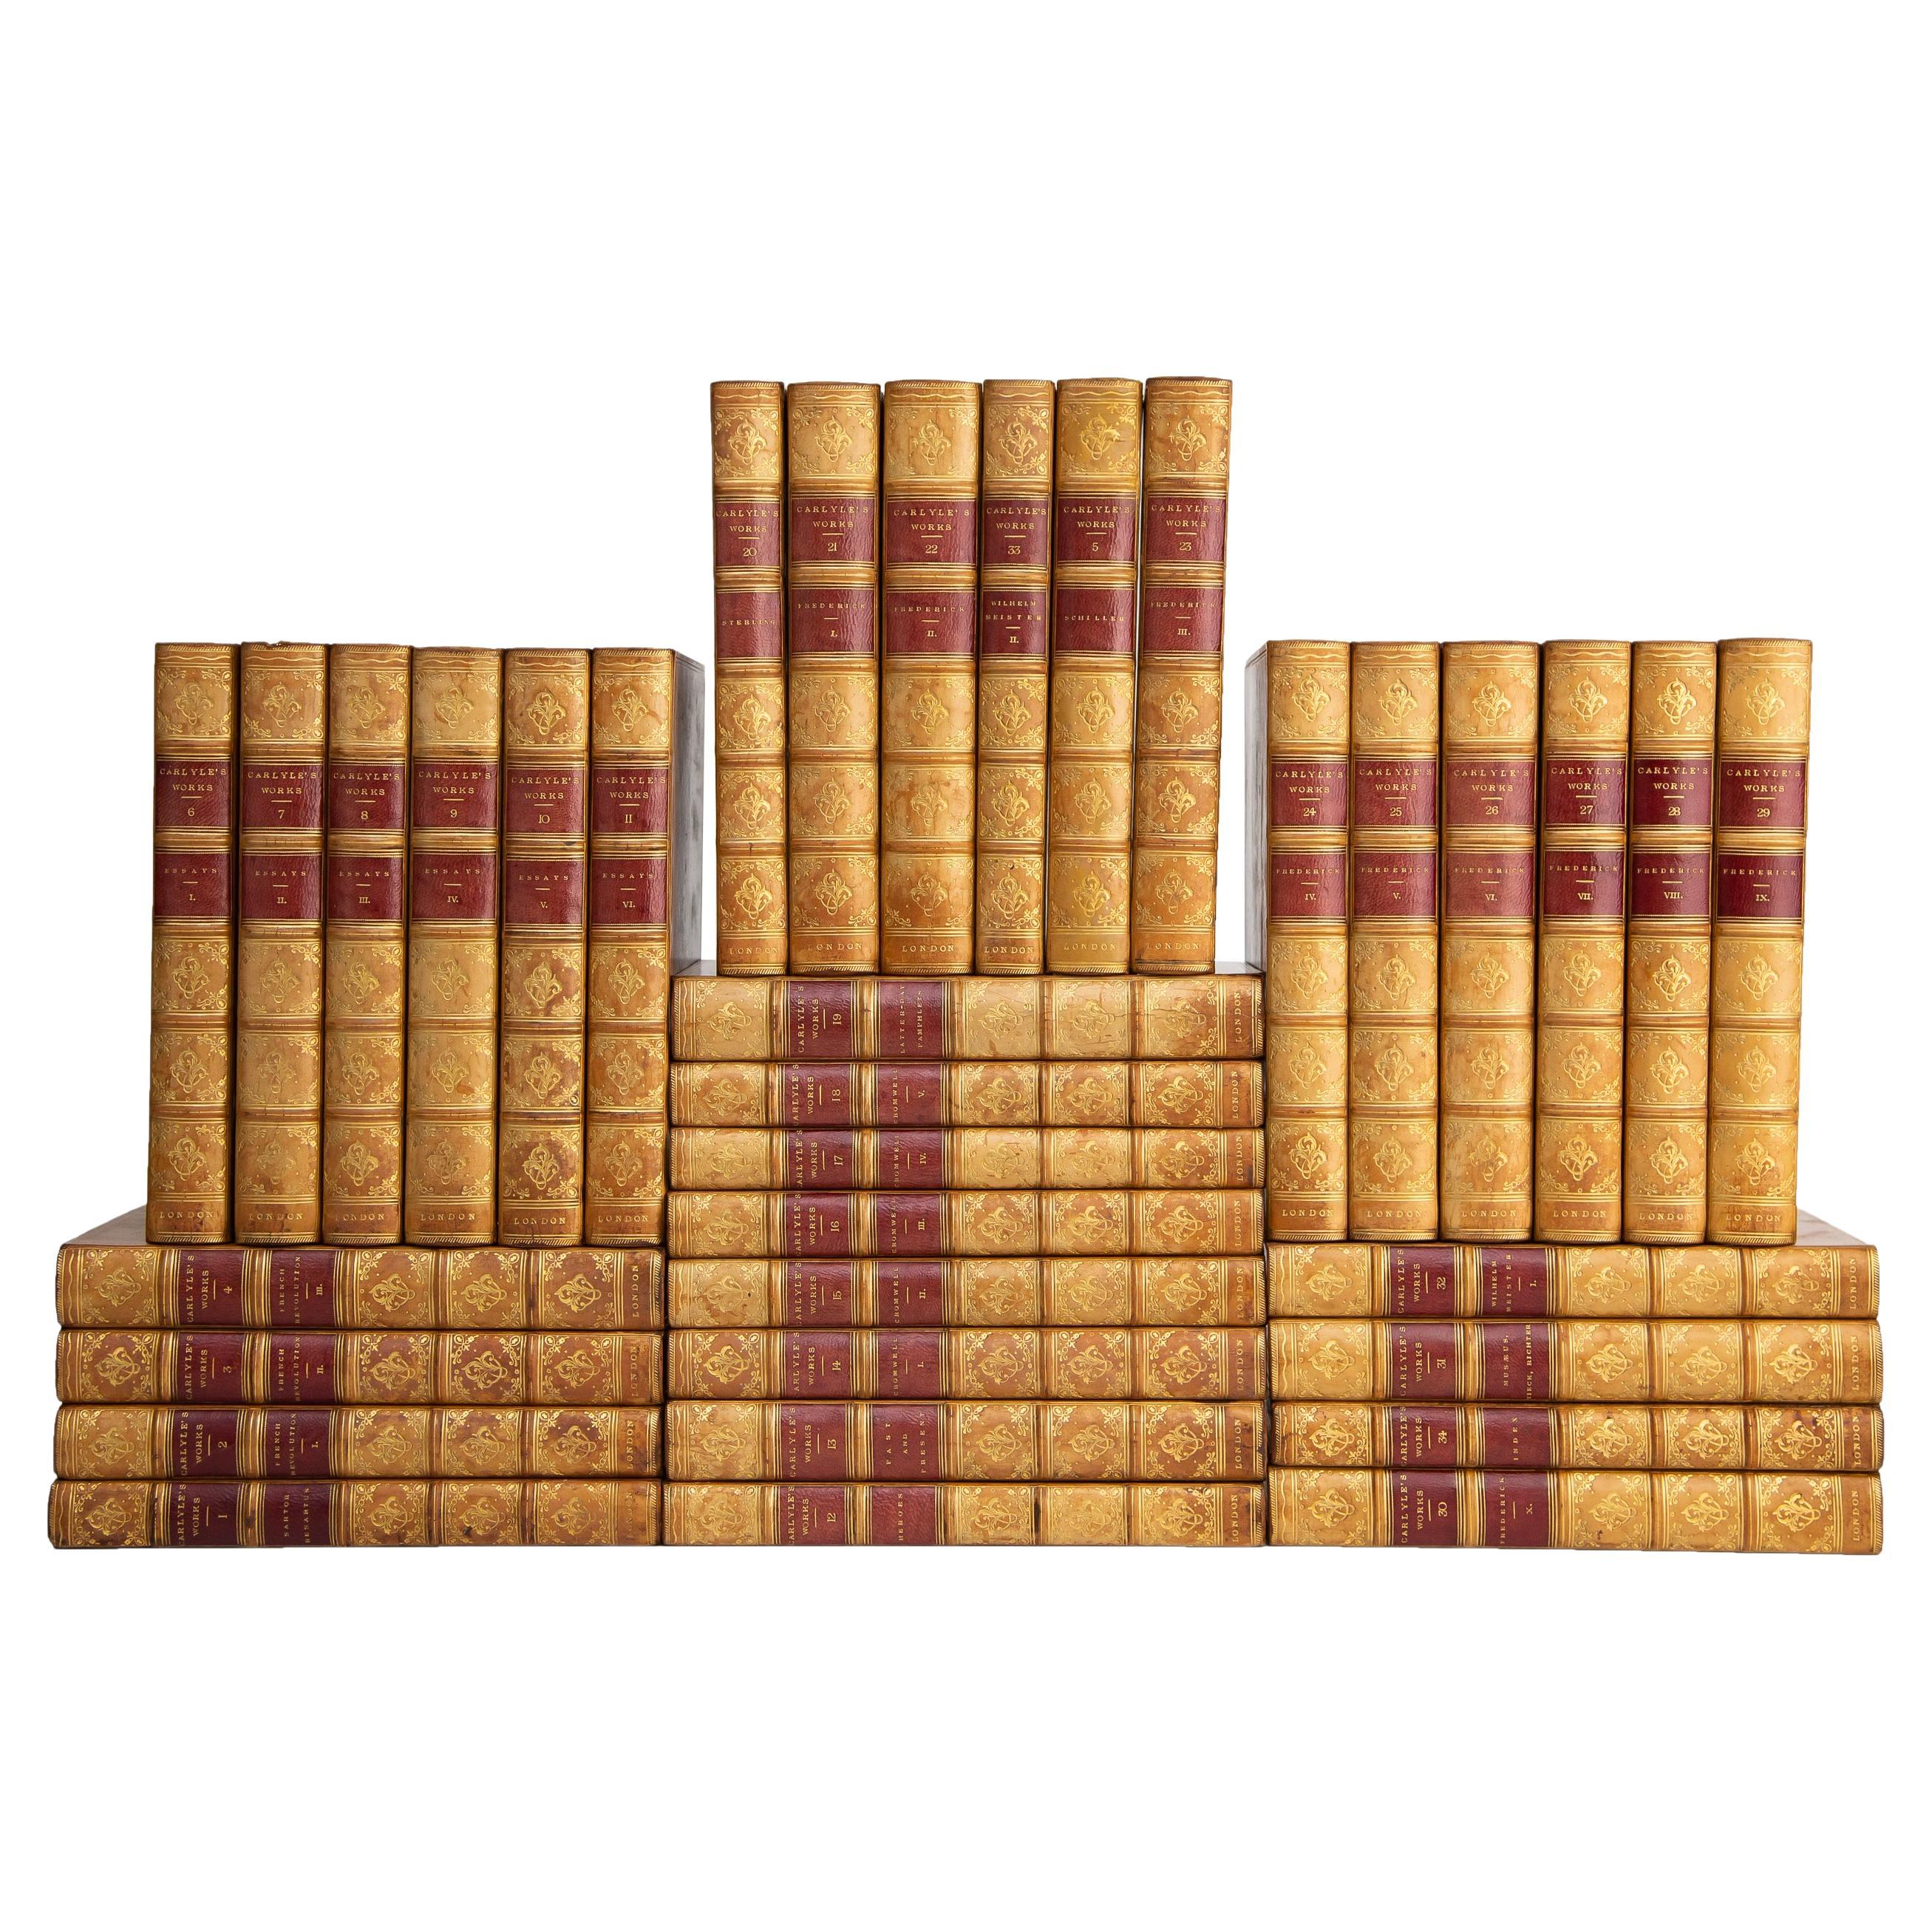 34 Volumes, Thomas Carlyle, Thomas Carlyle's Collected Works